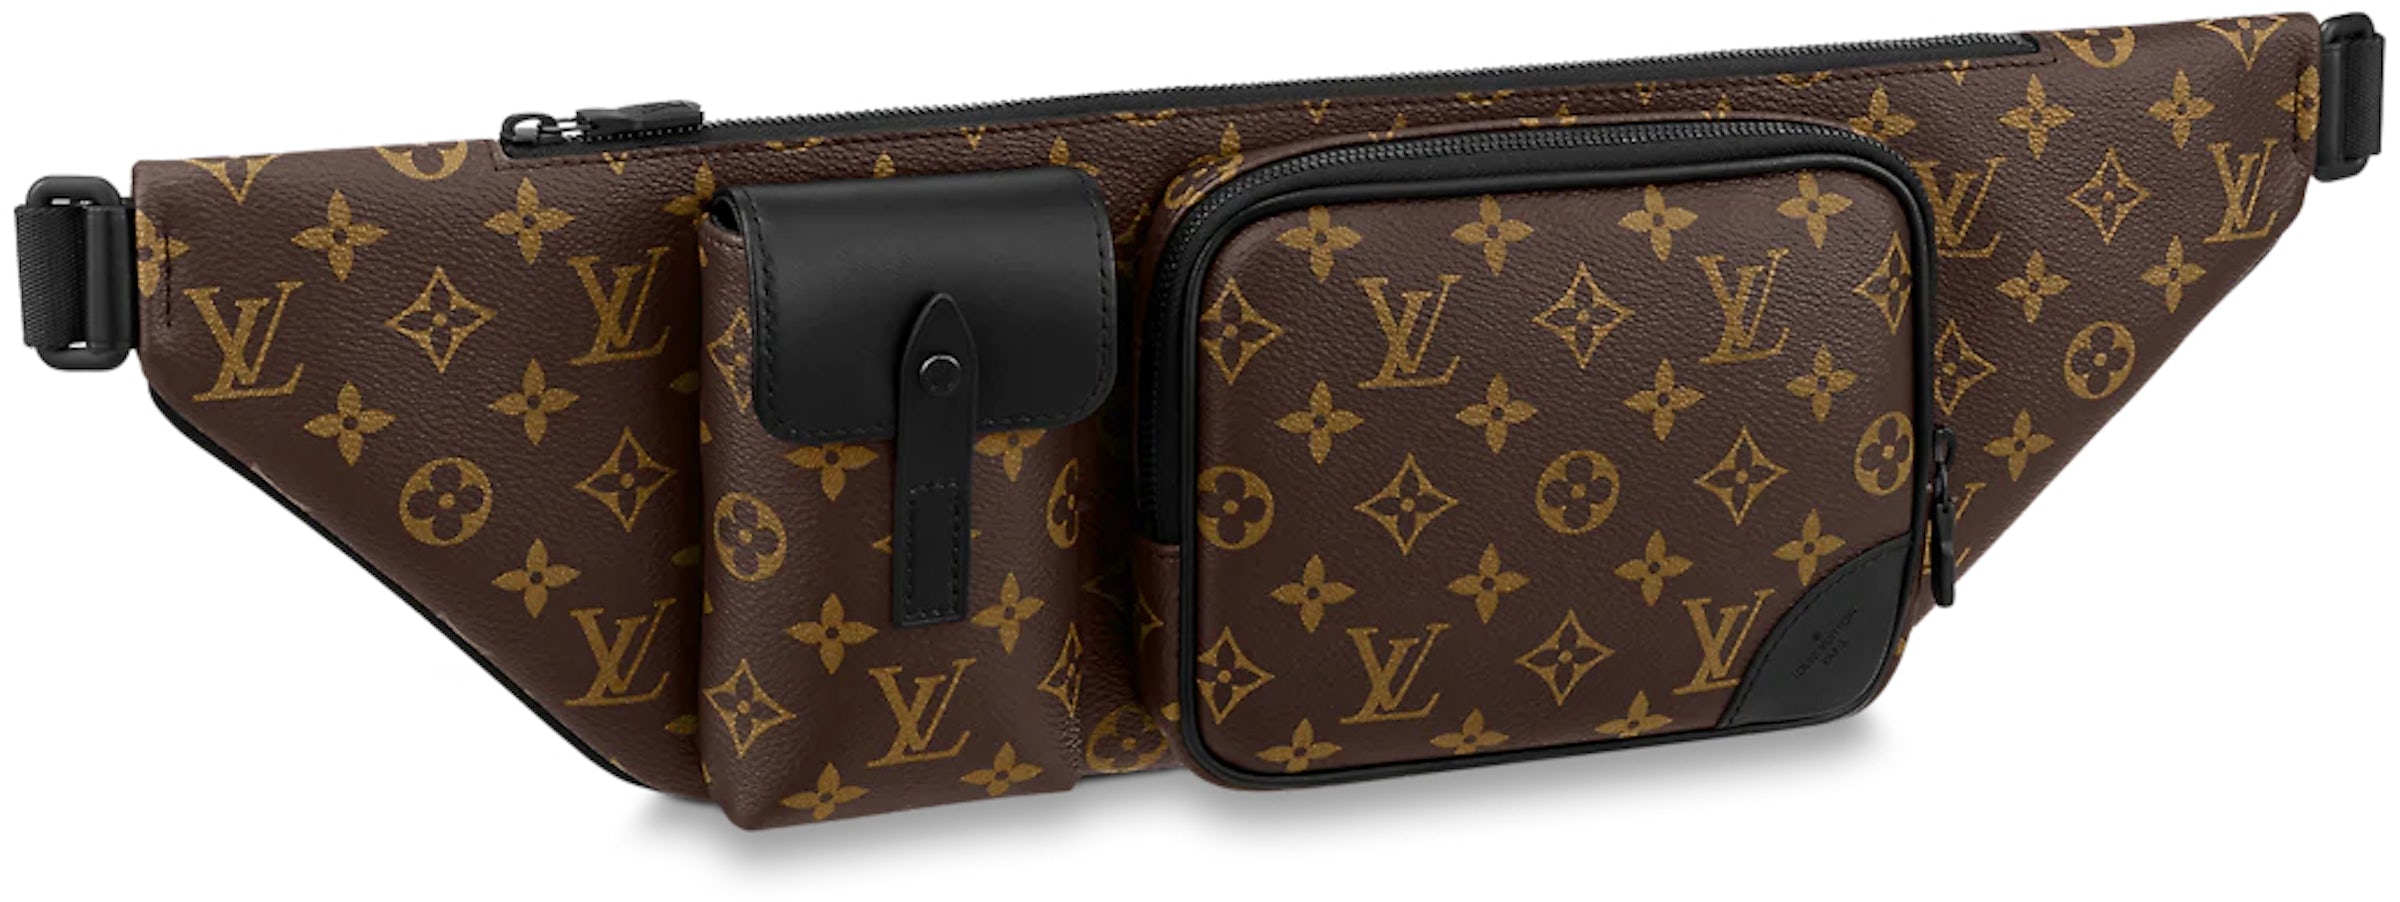 Louis Vuitton Bumbag Fake Vs Real: How-To Guide